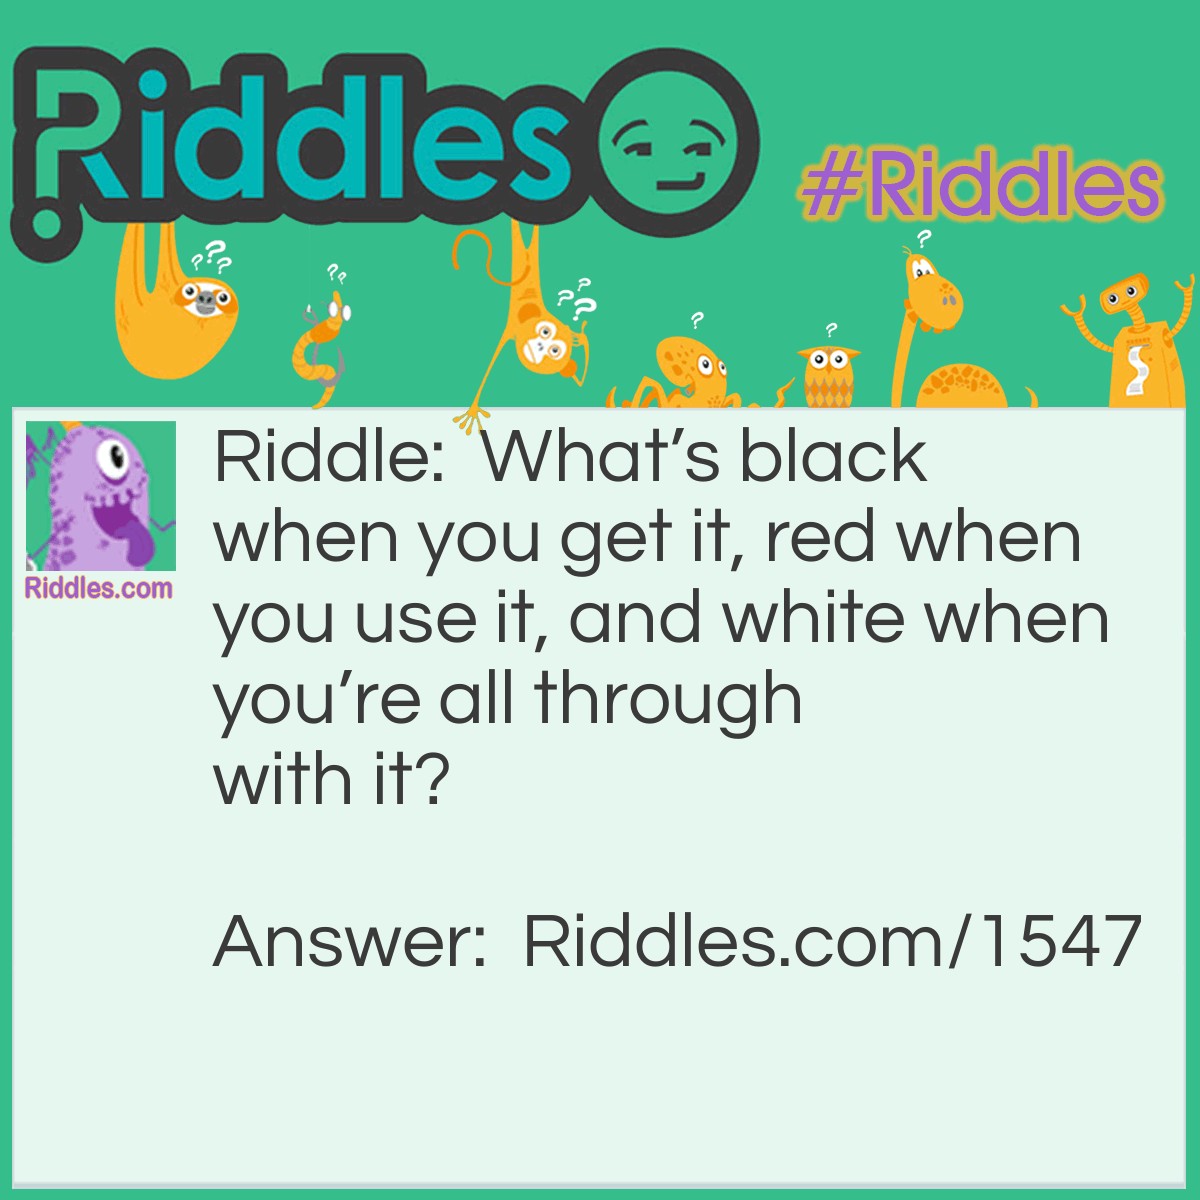 Riddle: What's black when you get it, red when you use it, and white when you're all through with it? Answer: Charcoal.